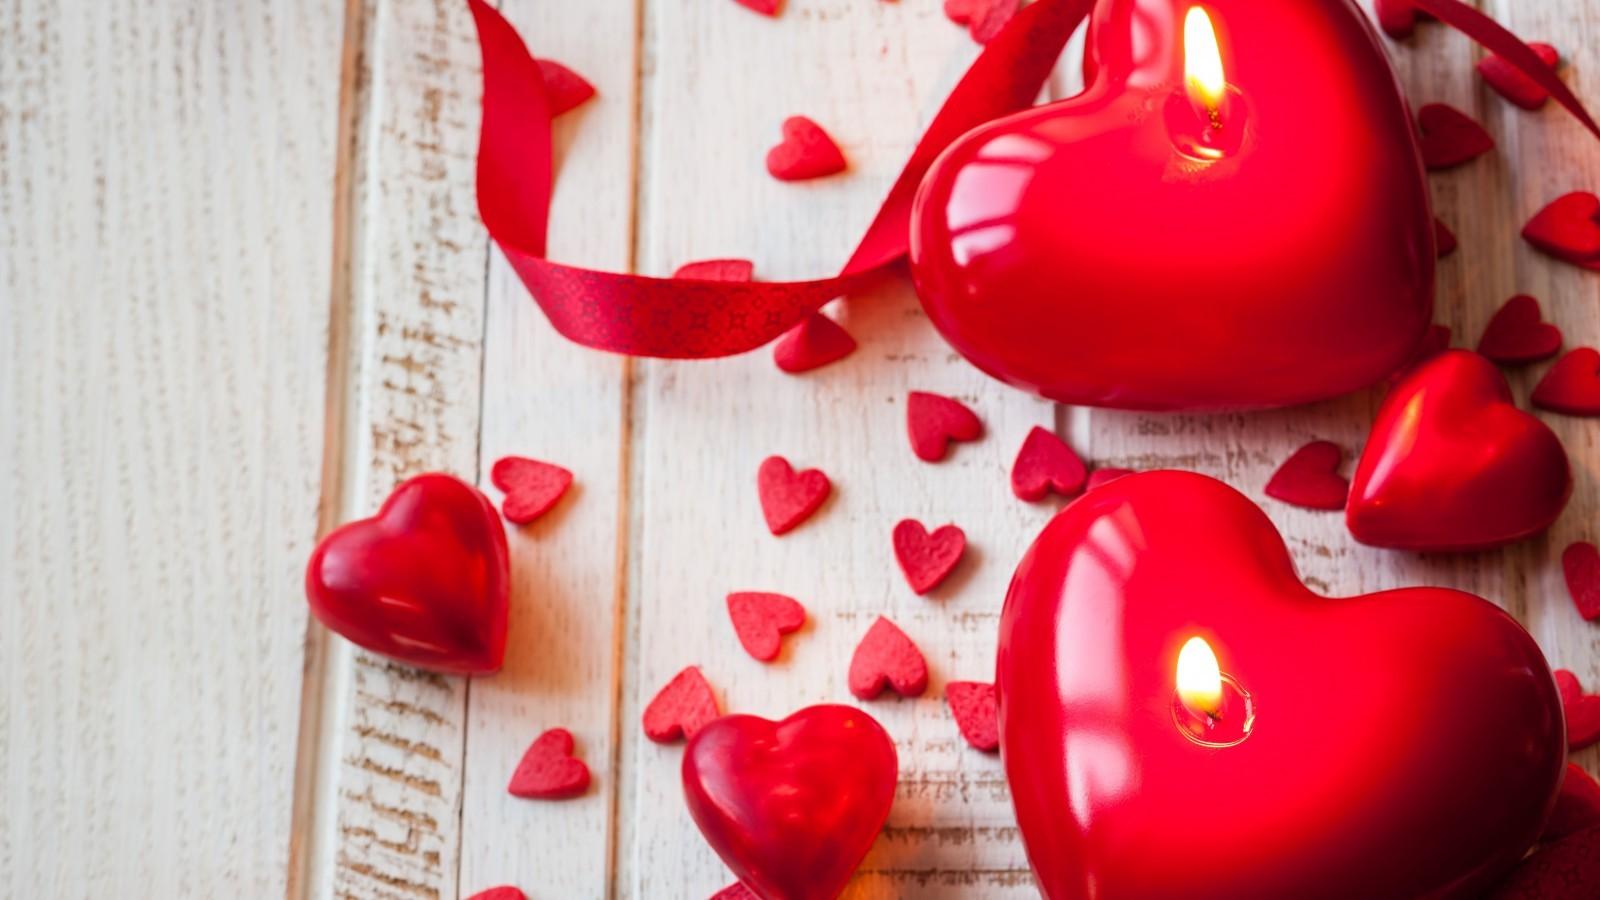 Download 1600x900 Valentine's Day Candles, Heart